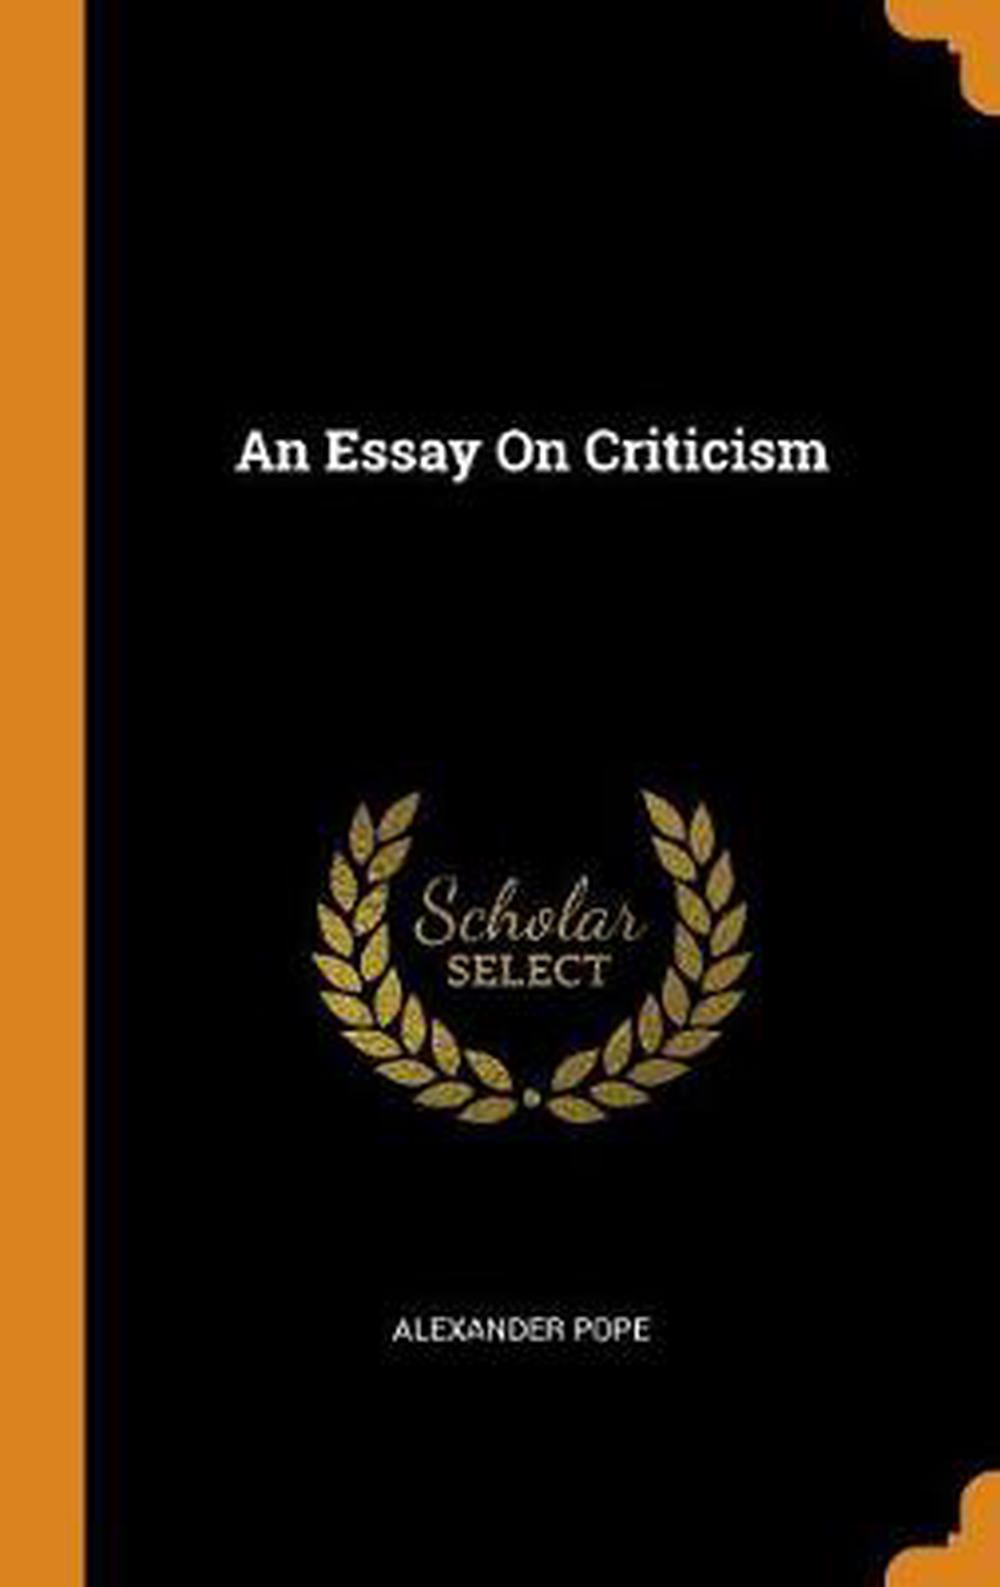 essay on criticism by alexander pope summary